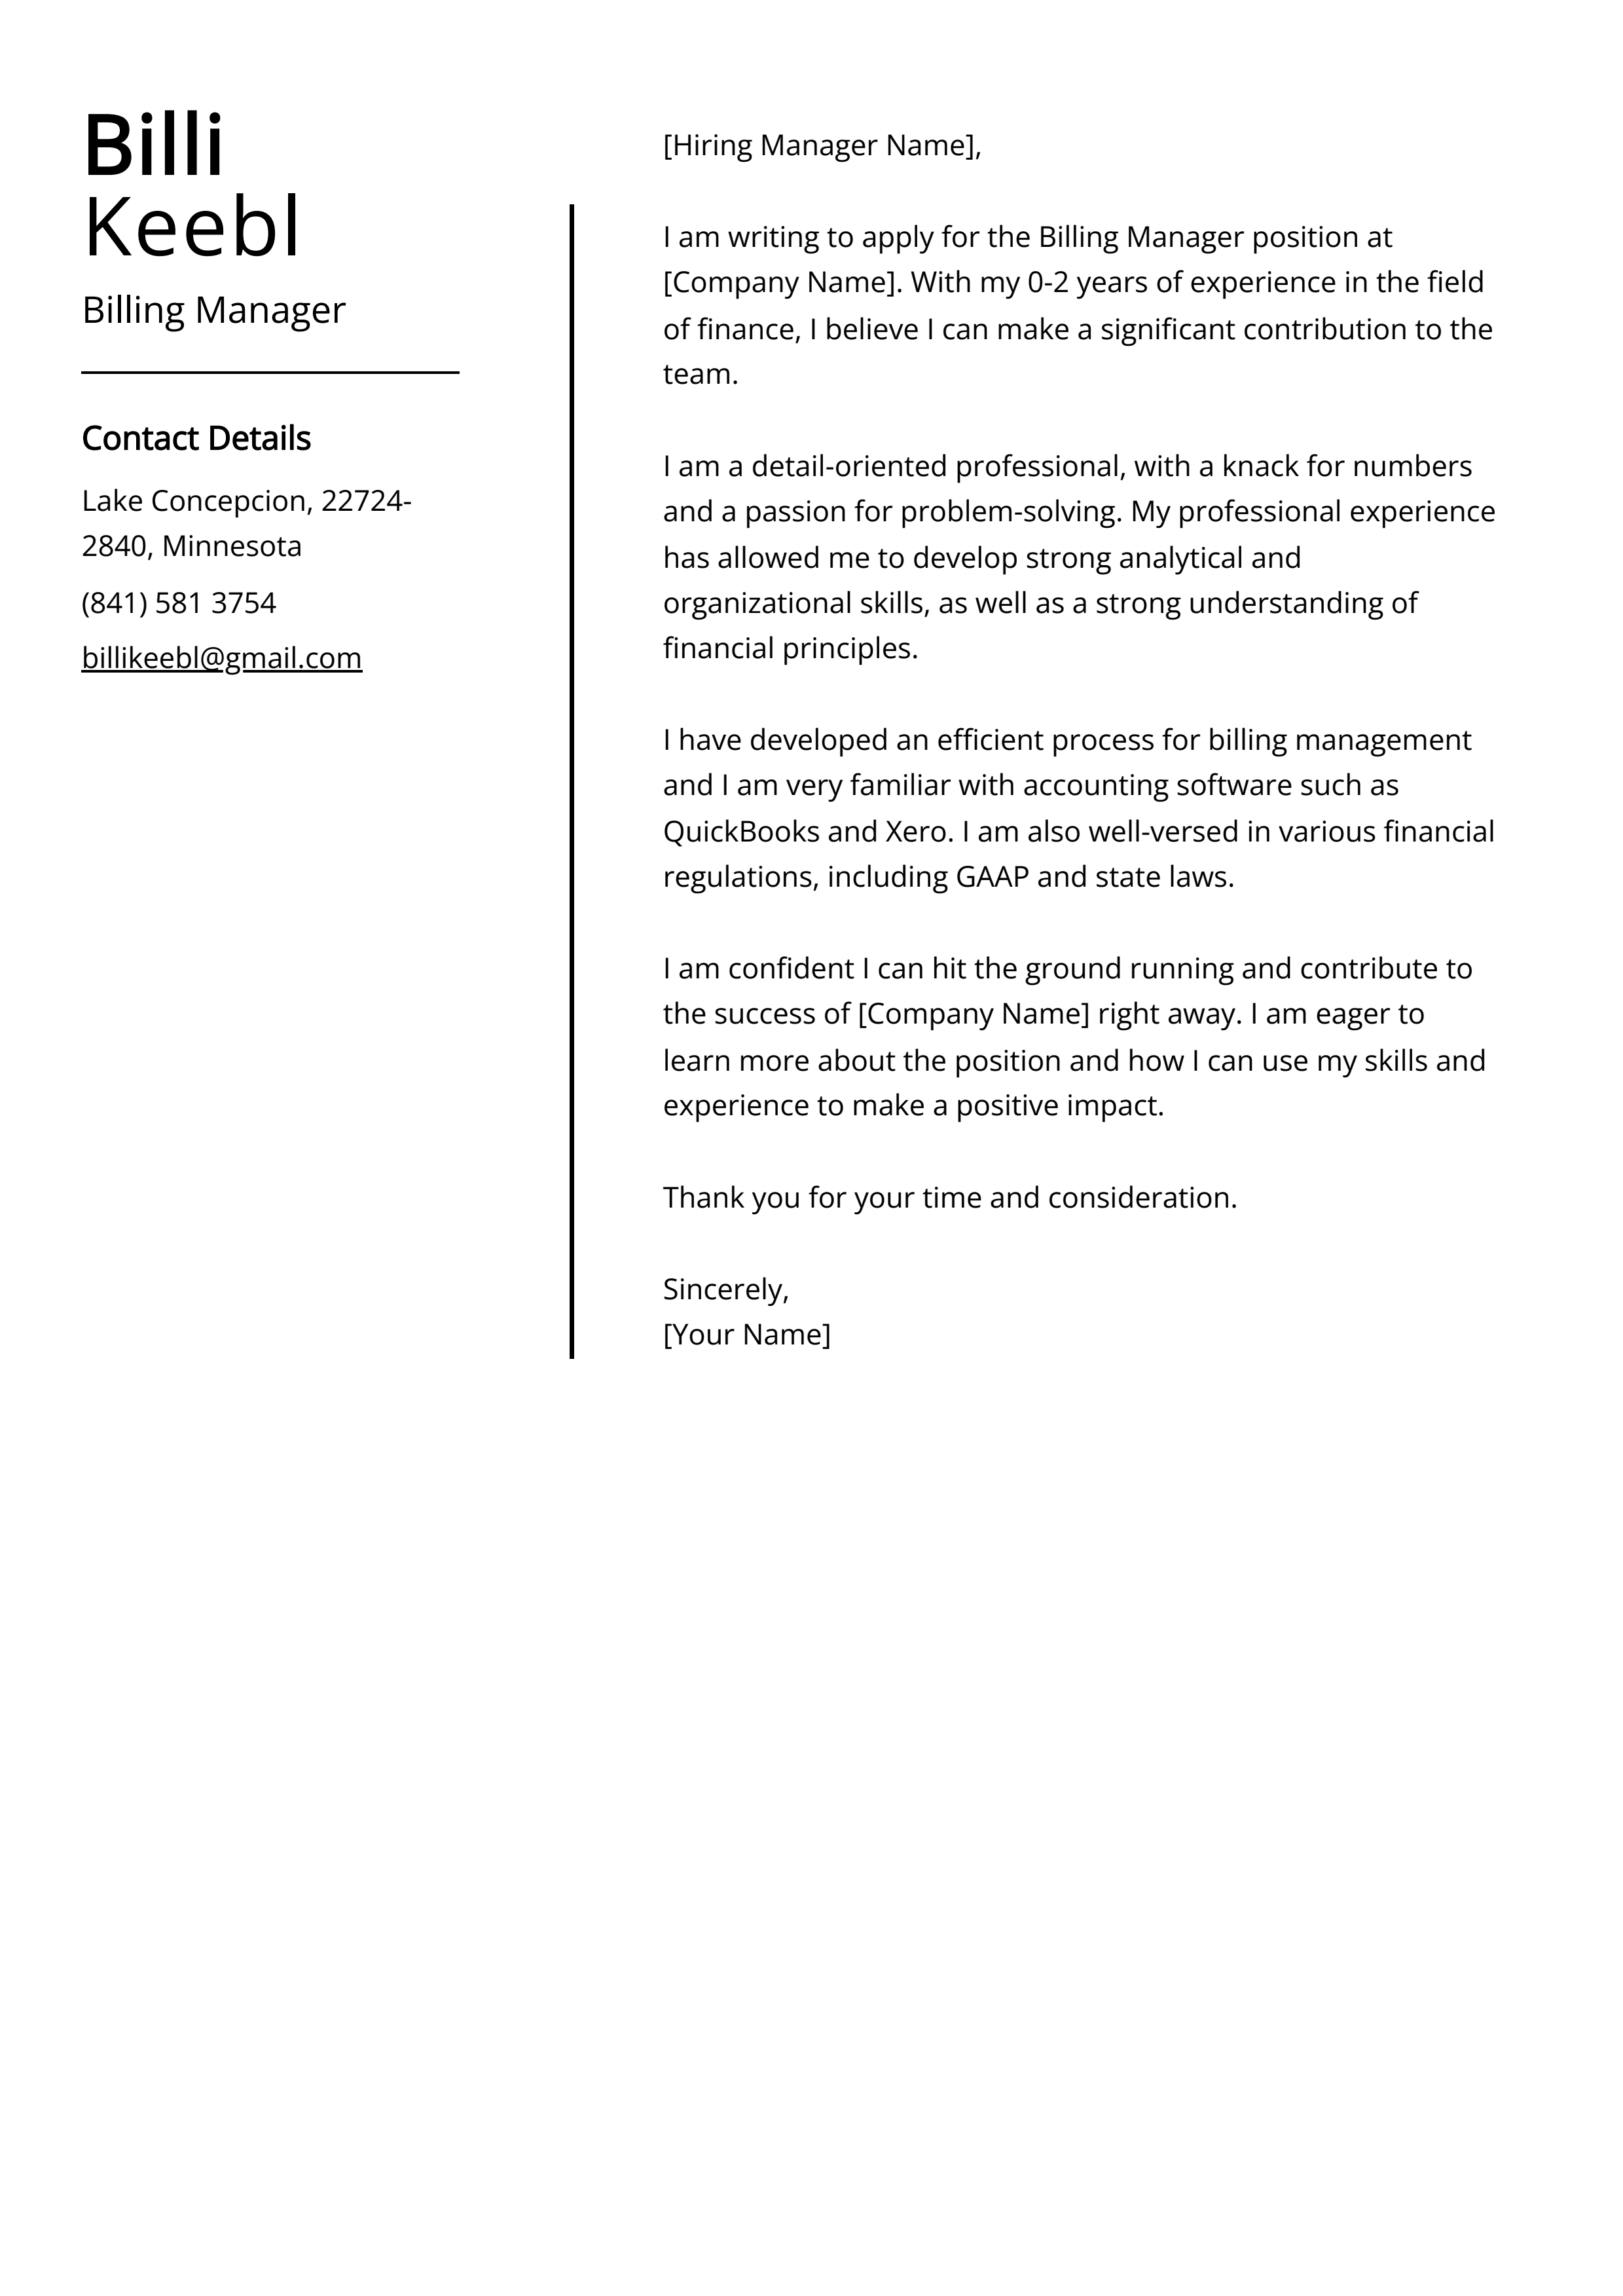 Billing Manager Cover Letter Example